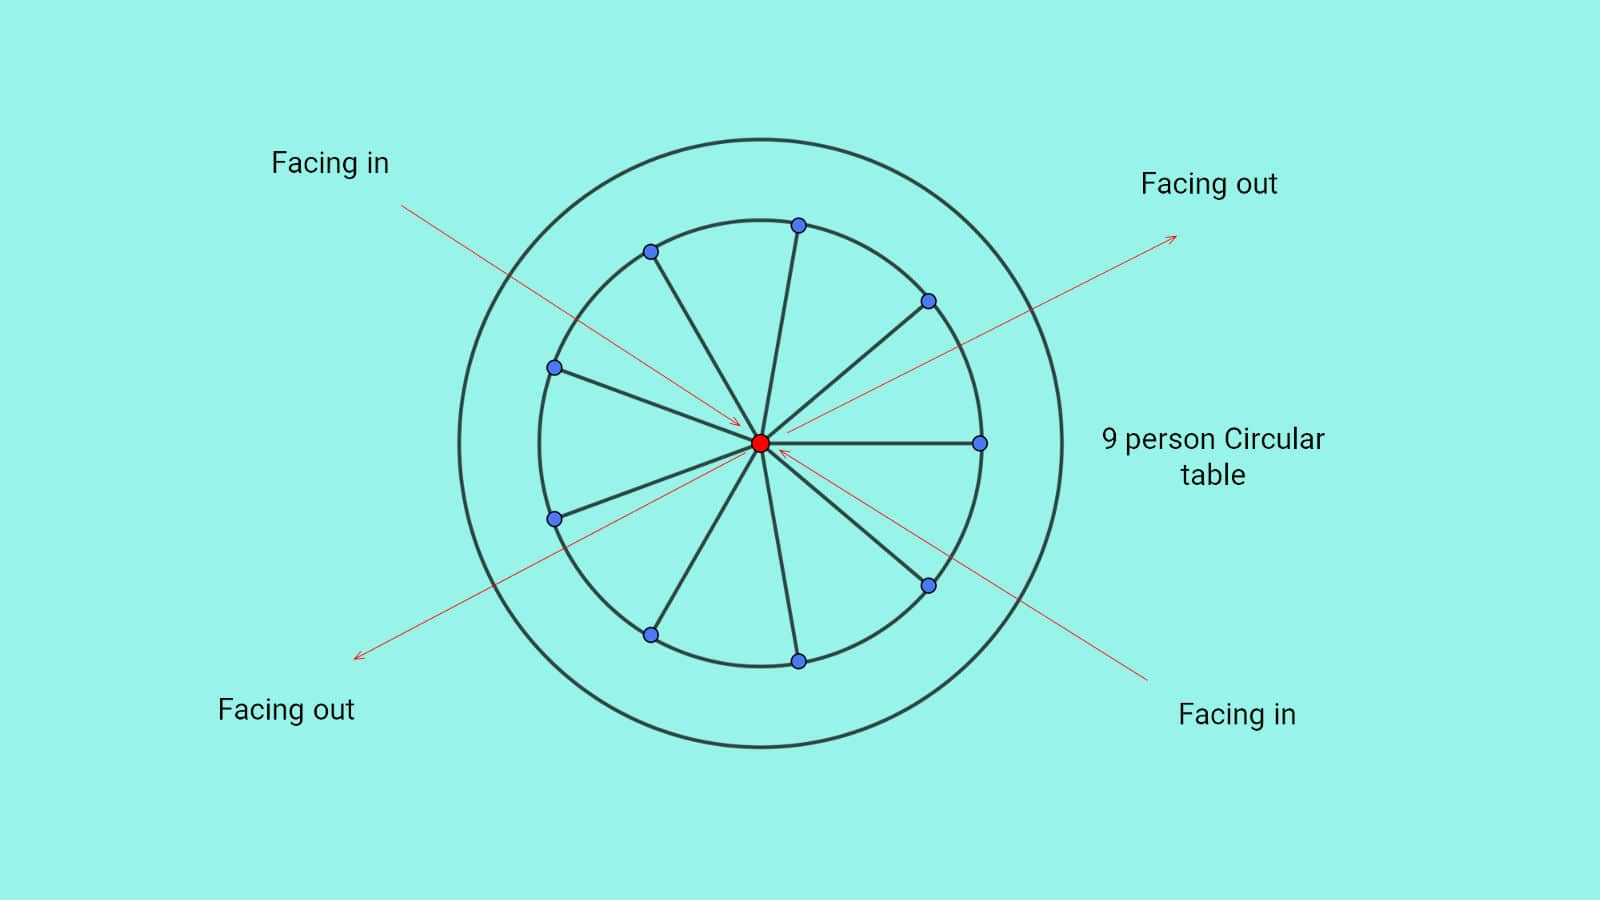 9 person circular seating arrangement reasoning puzzle for SBI PO 8